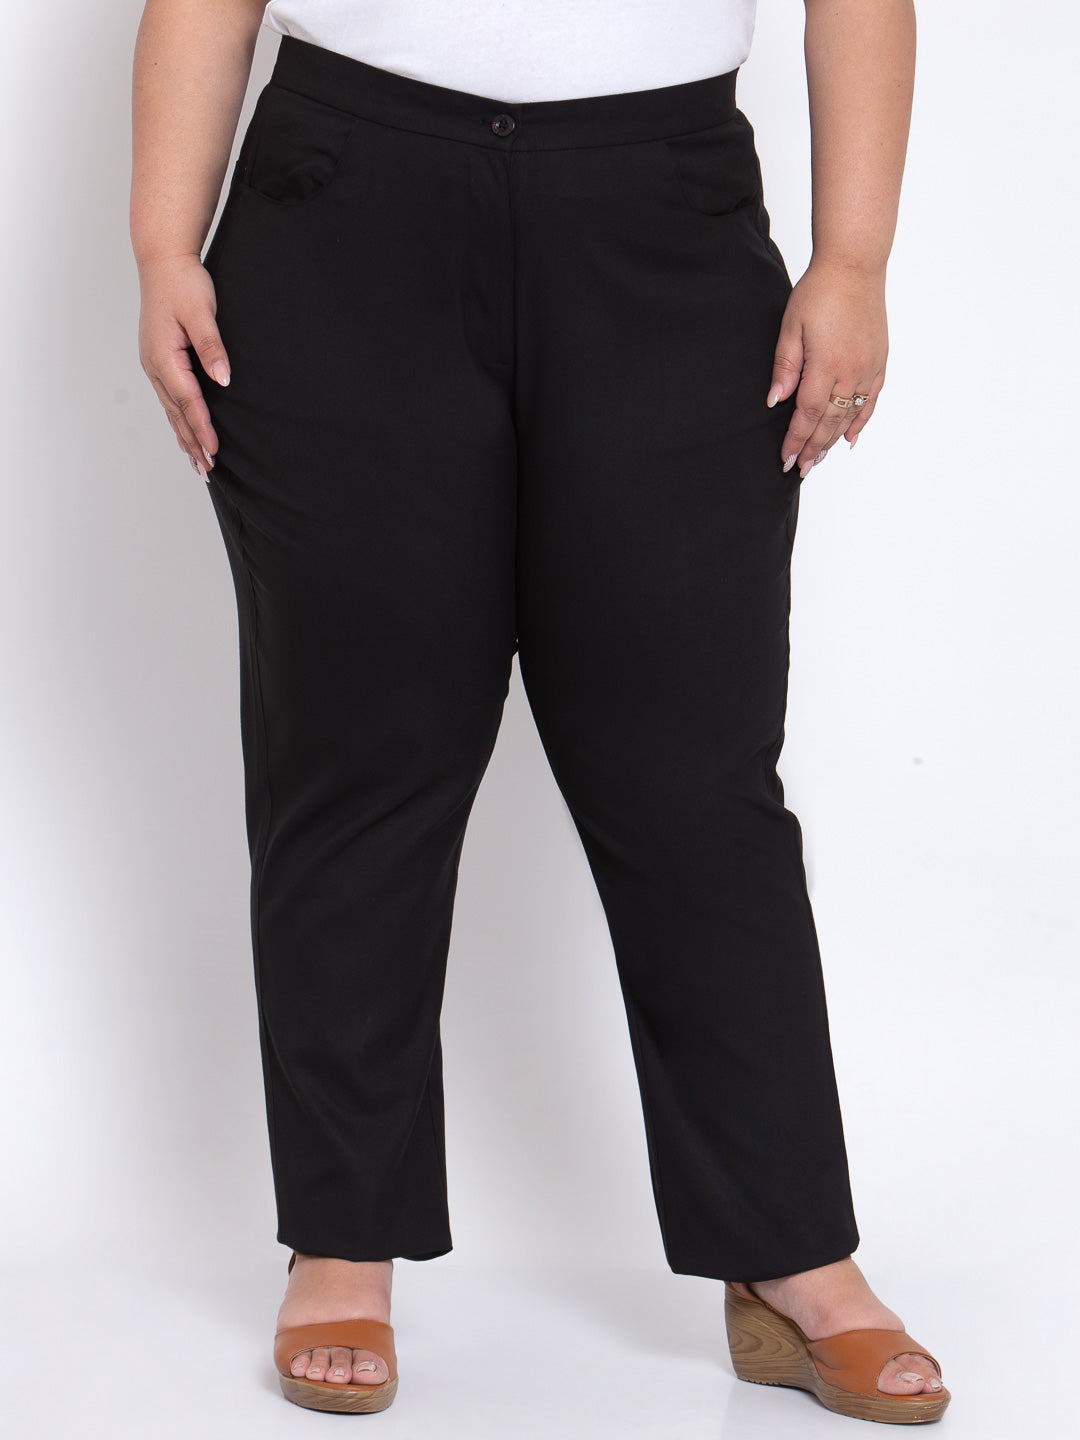 Buy Buynewtrend Carrera Full Length Women Formal Trousers and Pants (28,  Black) at Amazon.in